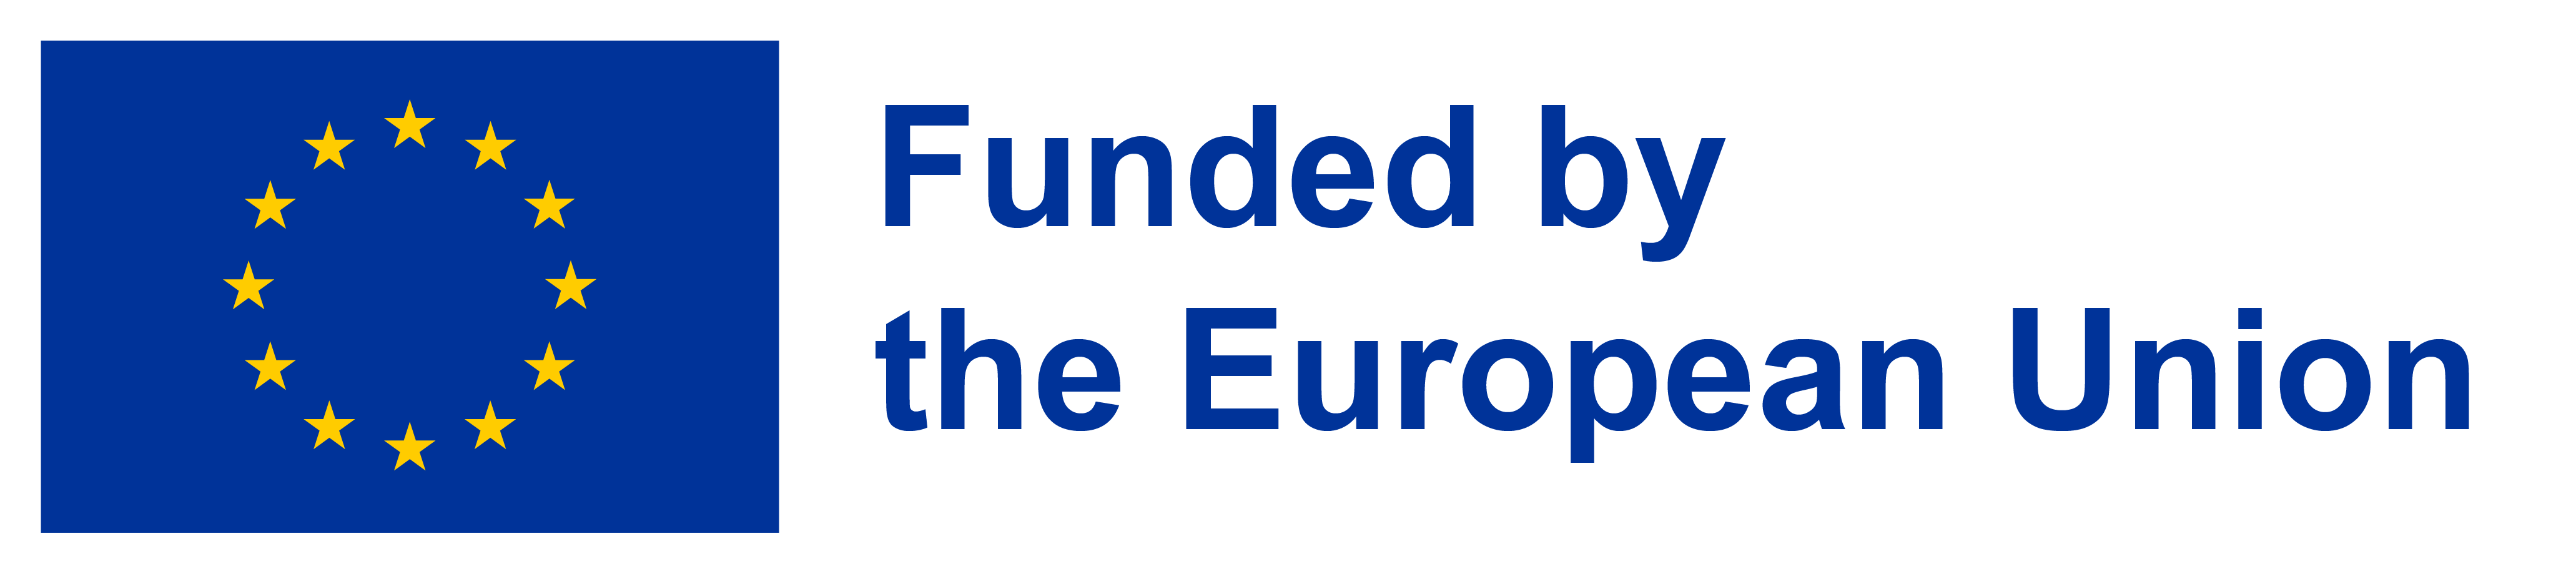 Funded by the European Union emblem